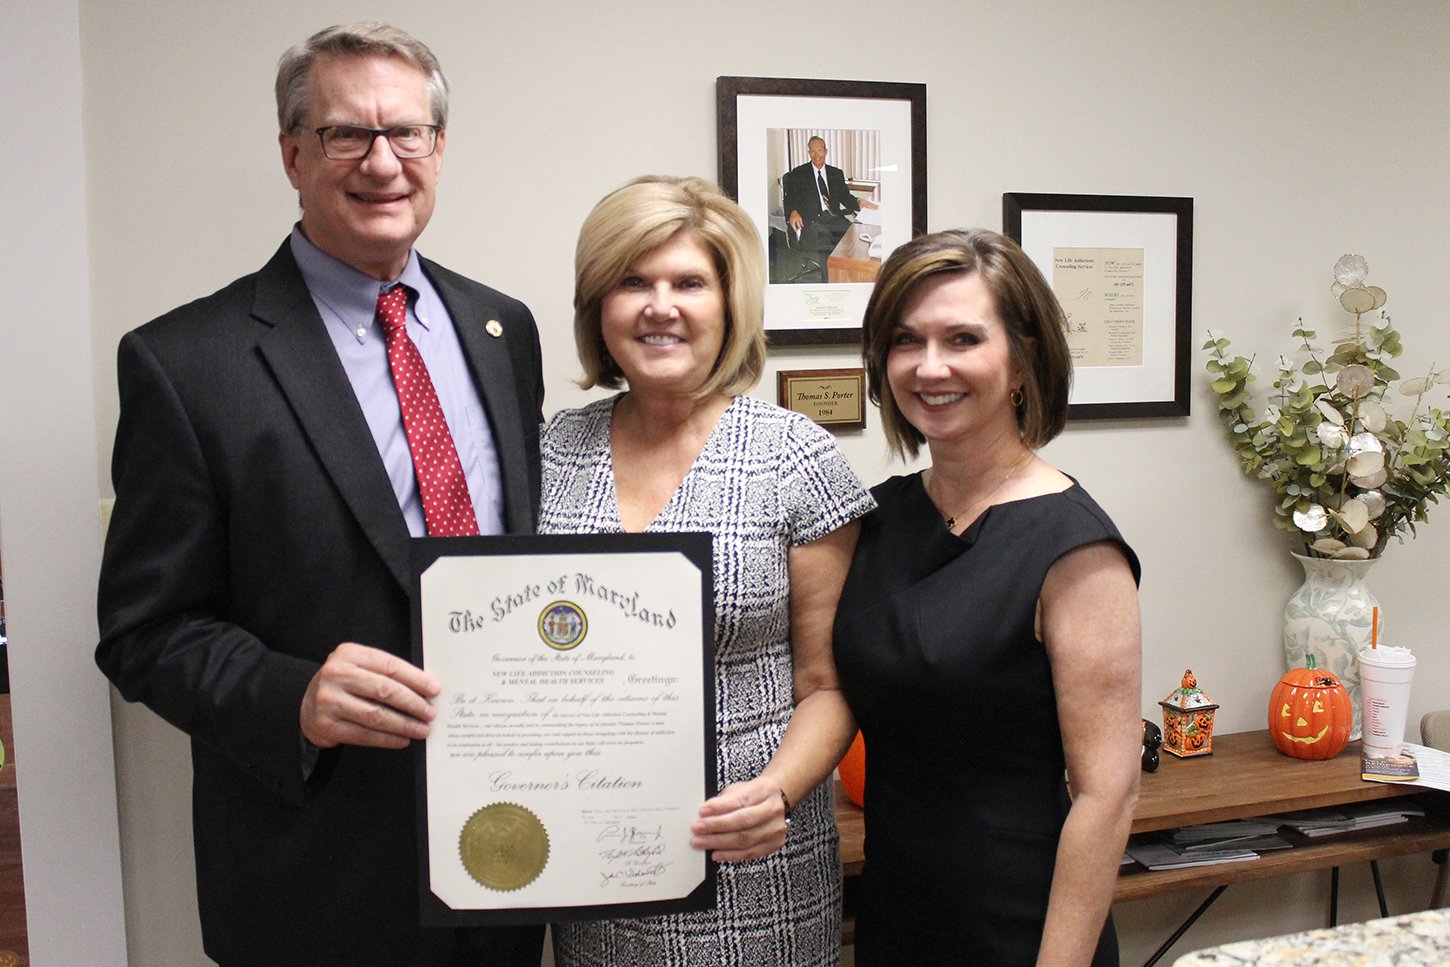 (L-R) Clay Stamp, executive director of Maryland’s Opioid Operational Command Center, presented the award to Porter’s daughters, Beverly Ervin, CEO of New Life Addiction Counseling Services, and Anissa Nahabedian.